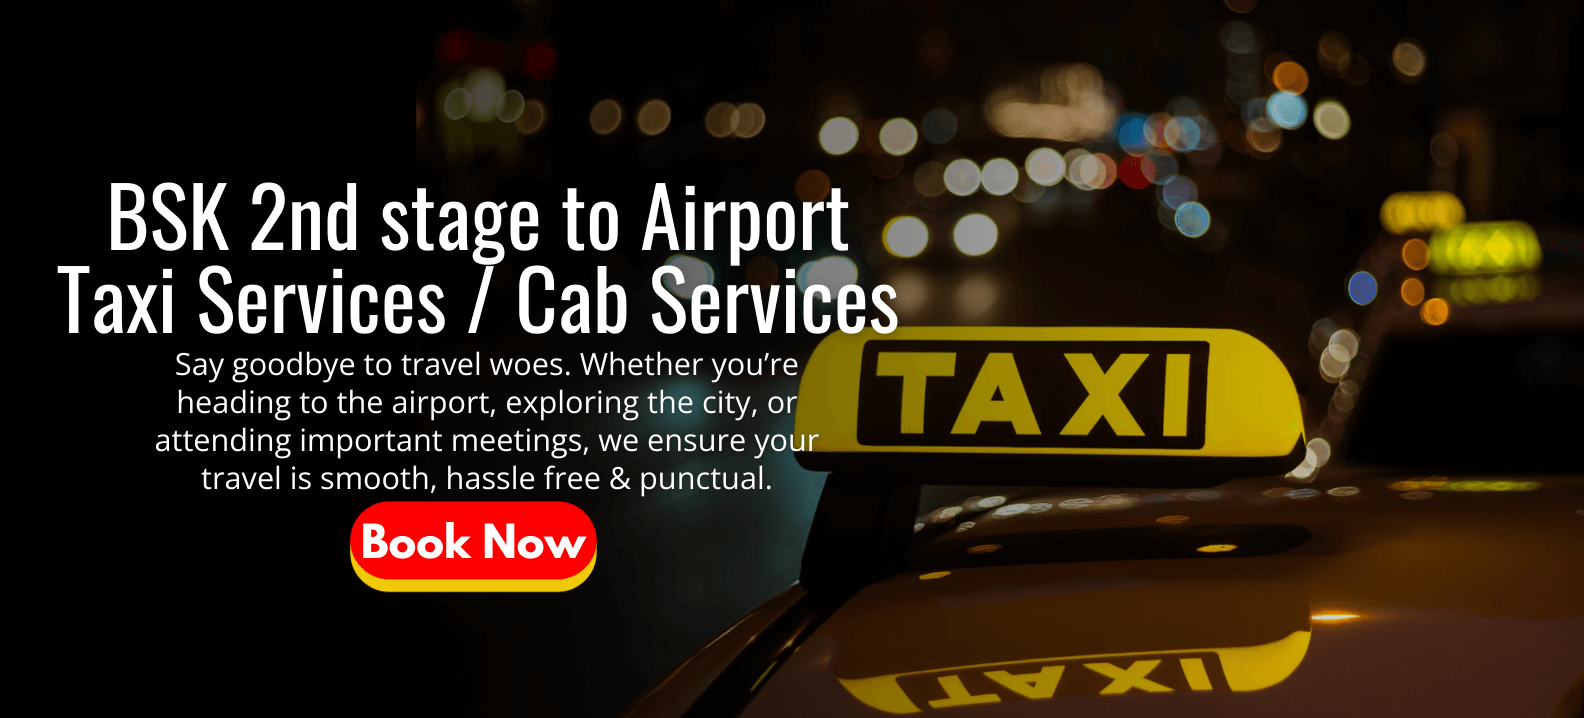 BSK 2nd stage to Airport Taxi Services _ Cab Services